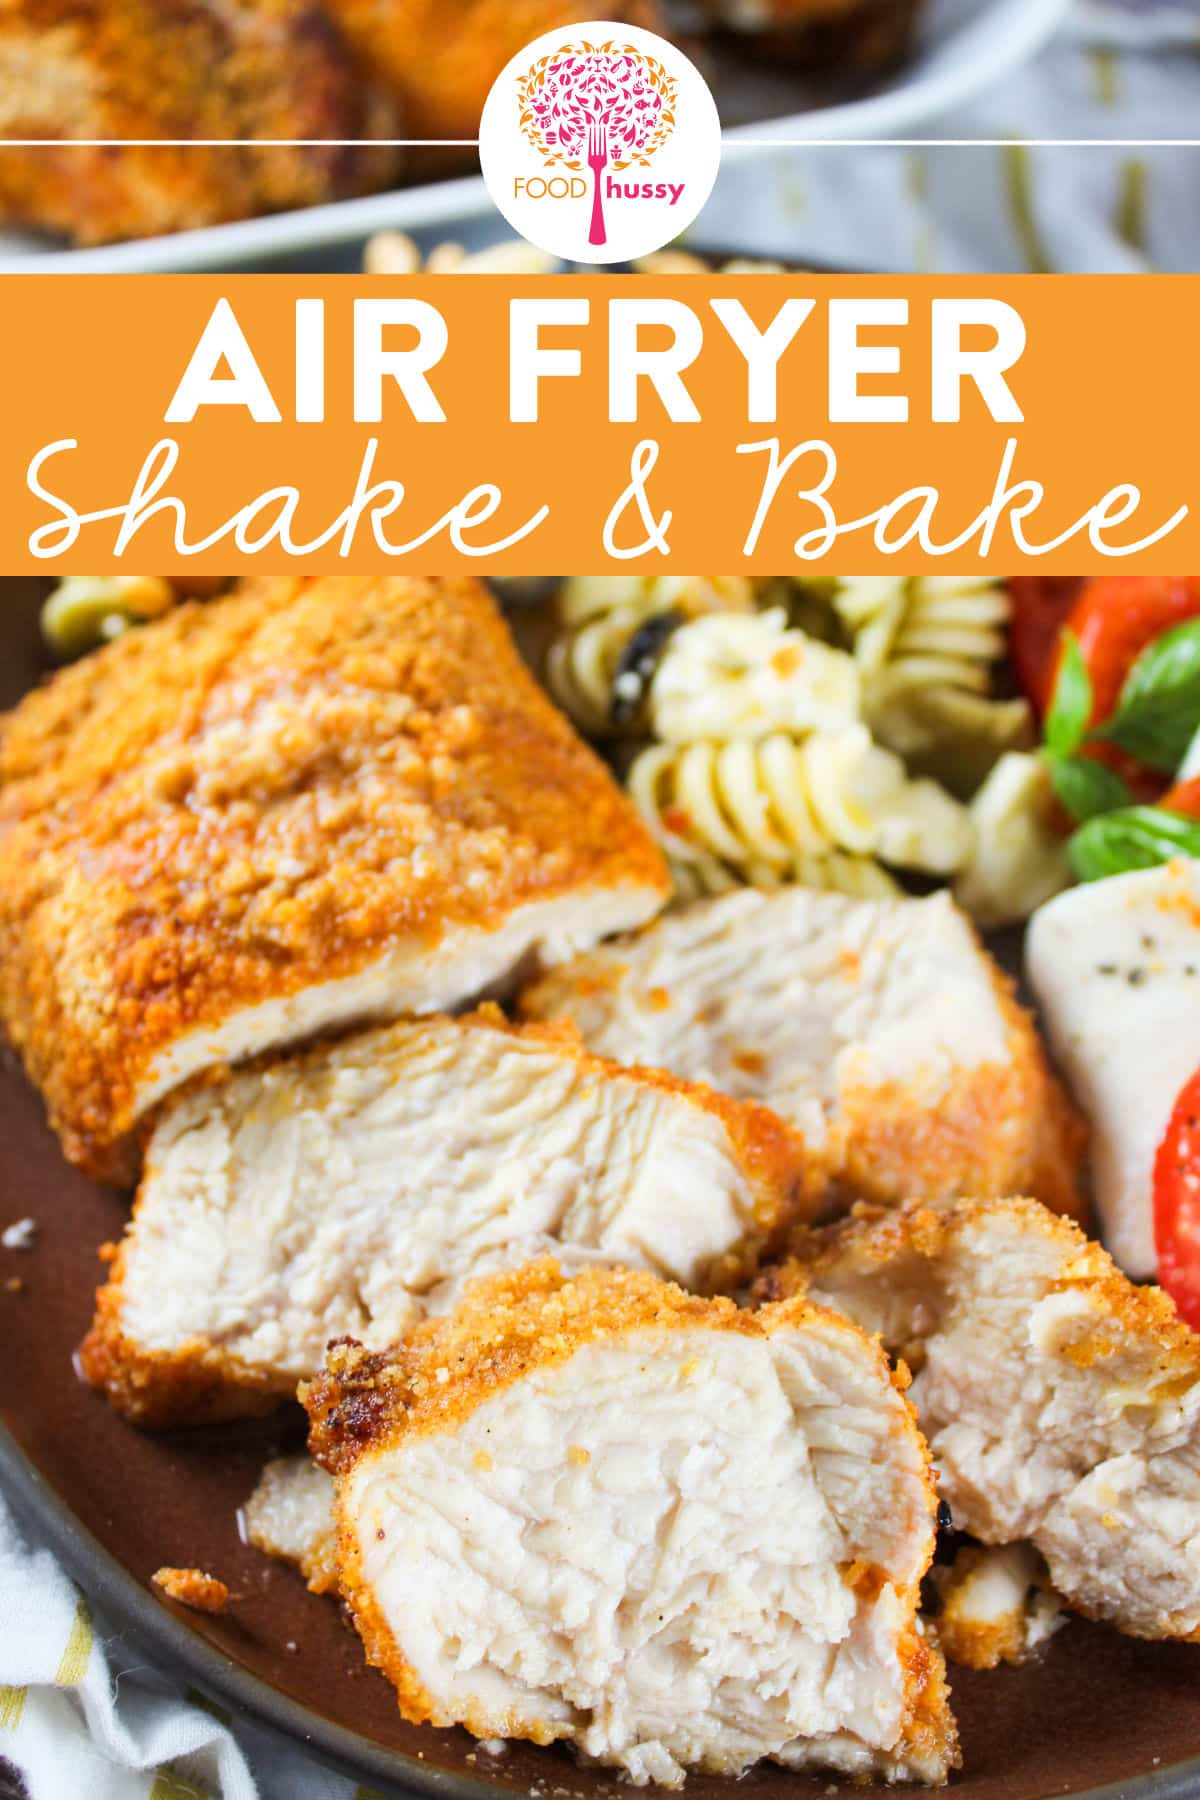 Air Fryer Shake 'n Bake Chicken is an easy weeknight meal that will serve you crispy chicken on the outside while keeping it juicy on the inside.  via @foodhussy